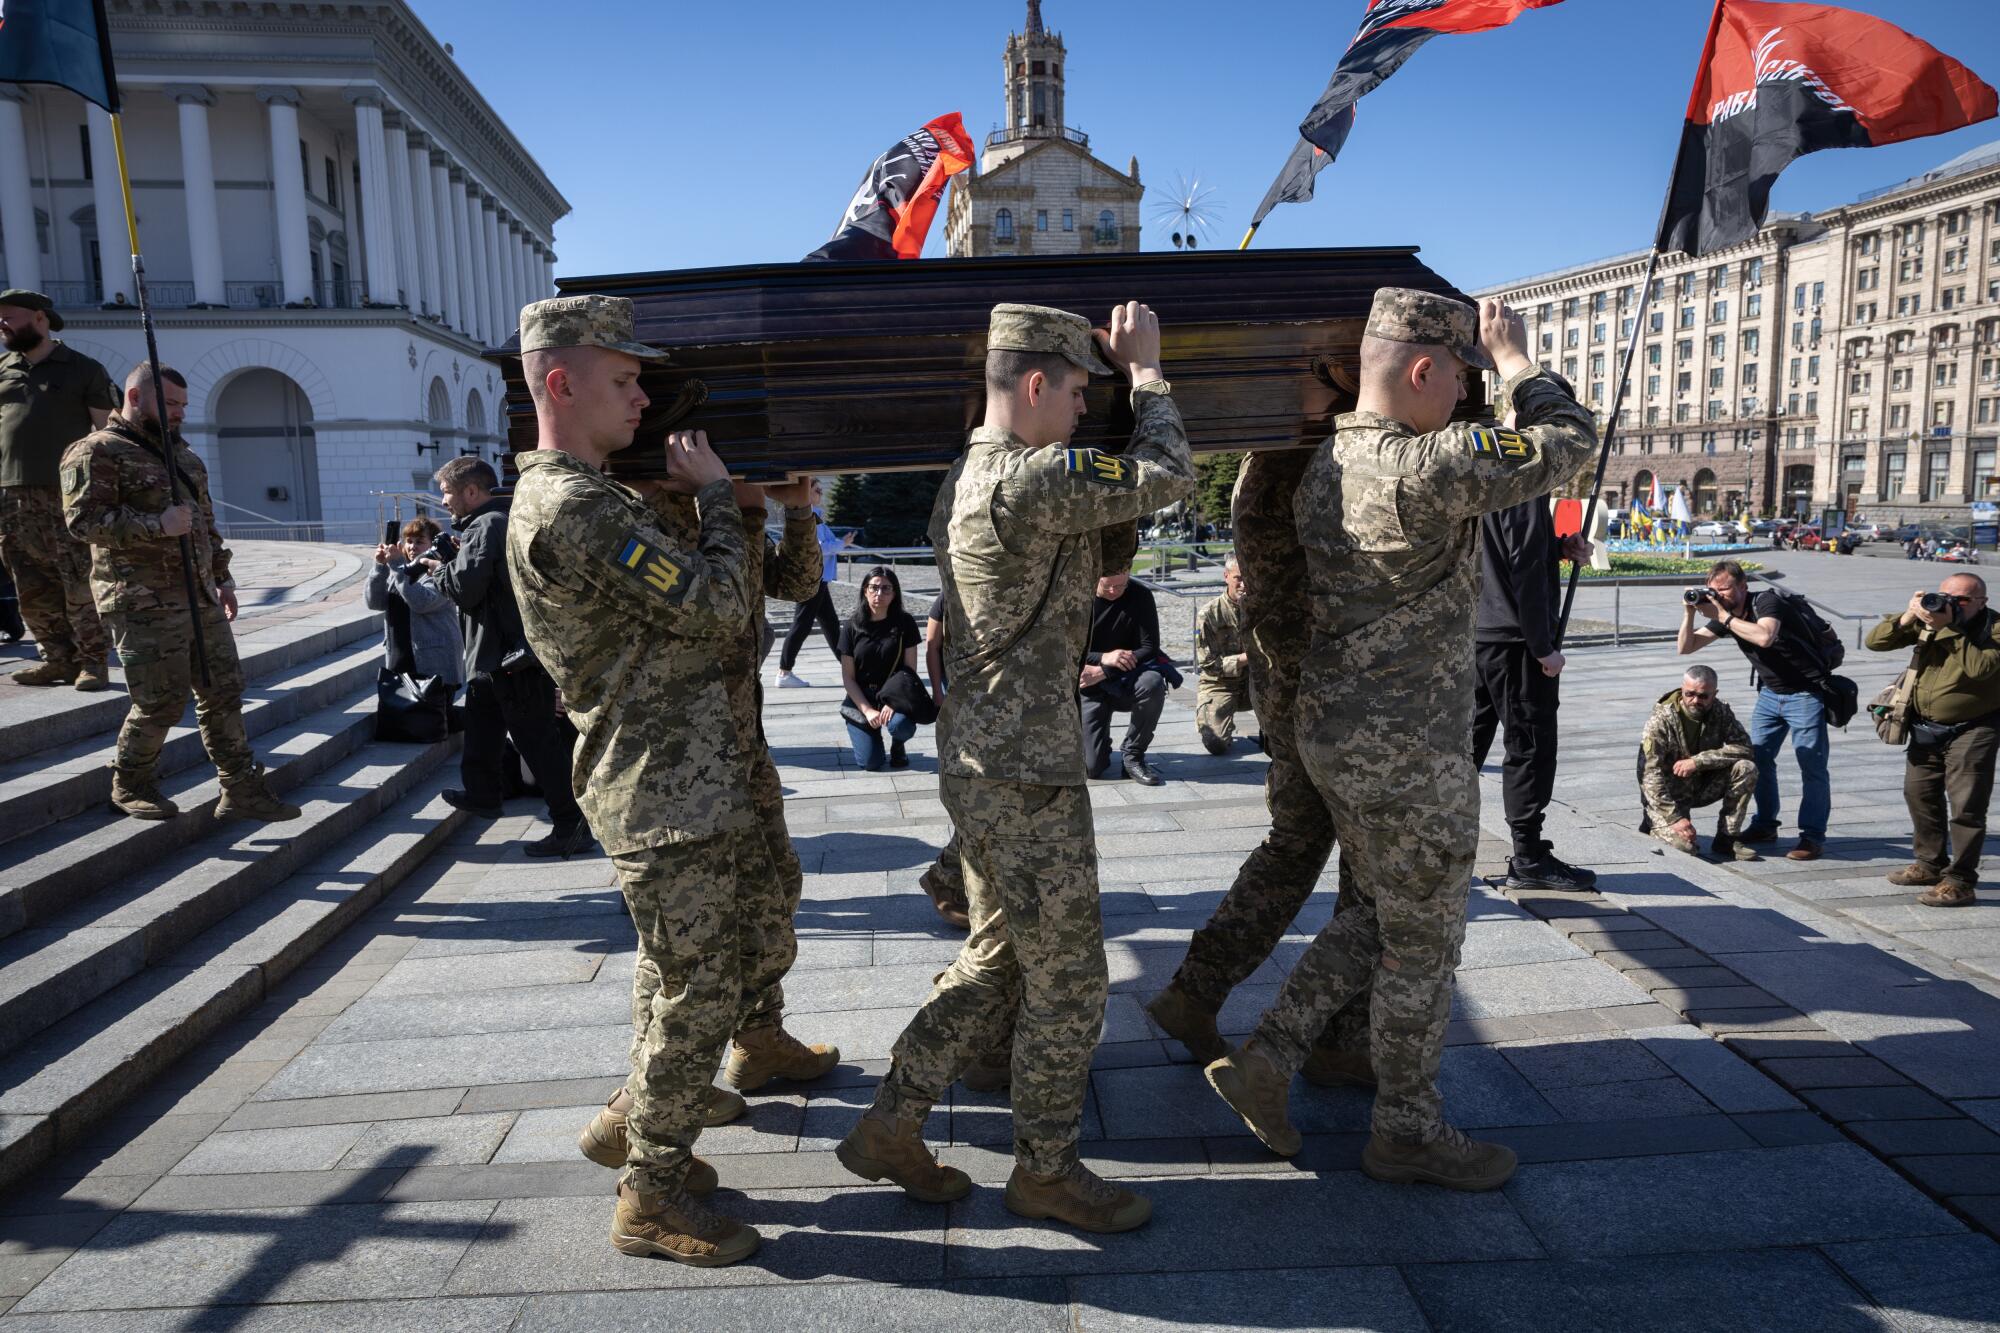 Men in camouflage carry two wooden coffins in a square near people holding red-and-black flags